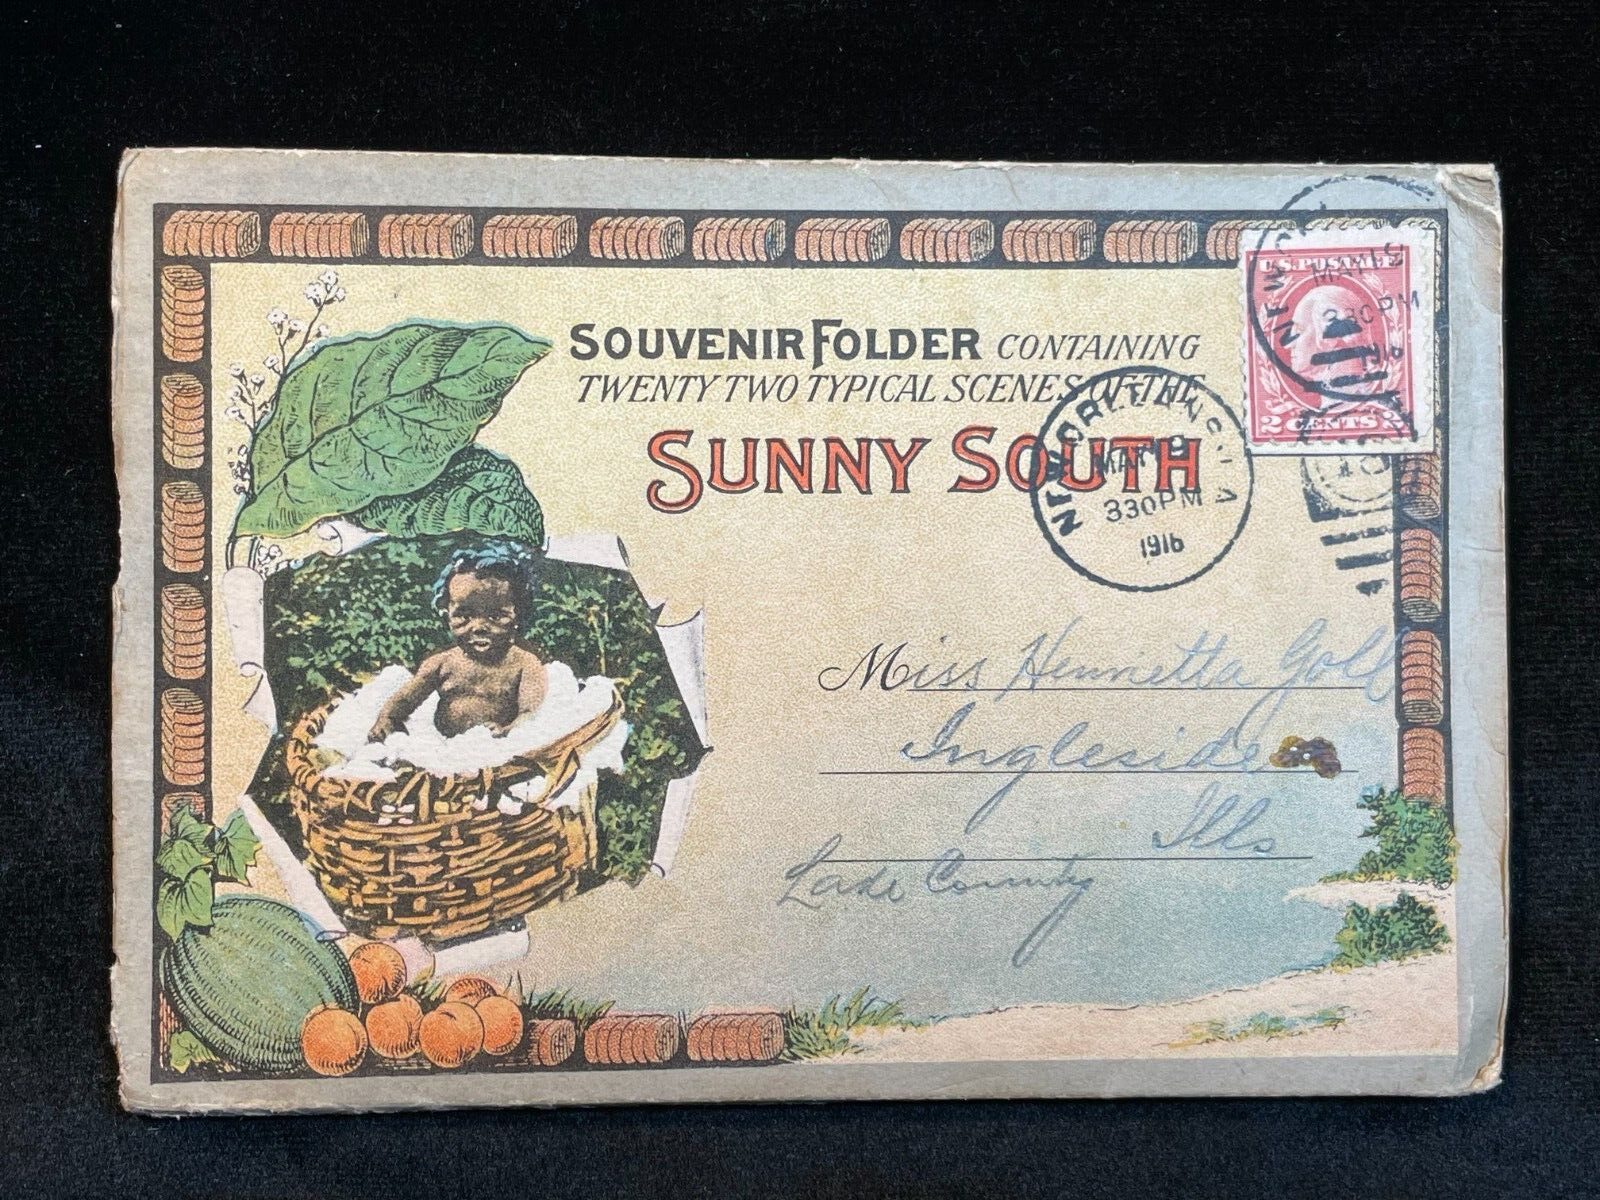 SCARCE ANTIQUE SOUVENIR FOLDER OF THE SUNNY SOUTH 22 TYPICAL SCENES POSTED 1916